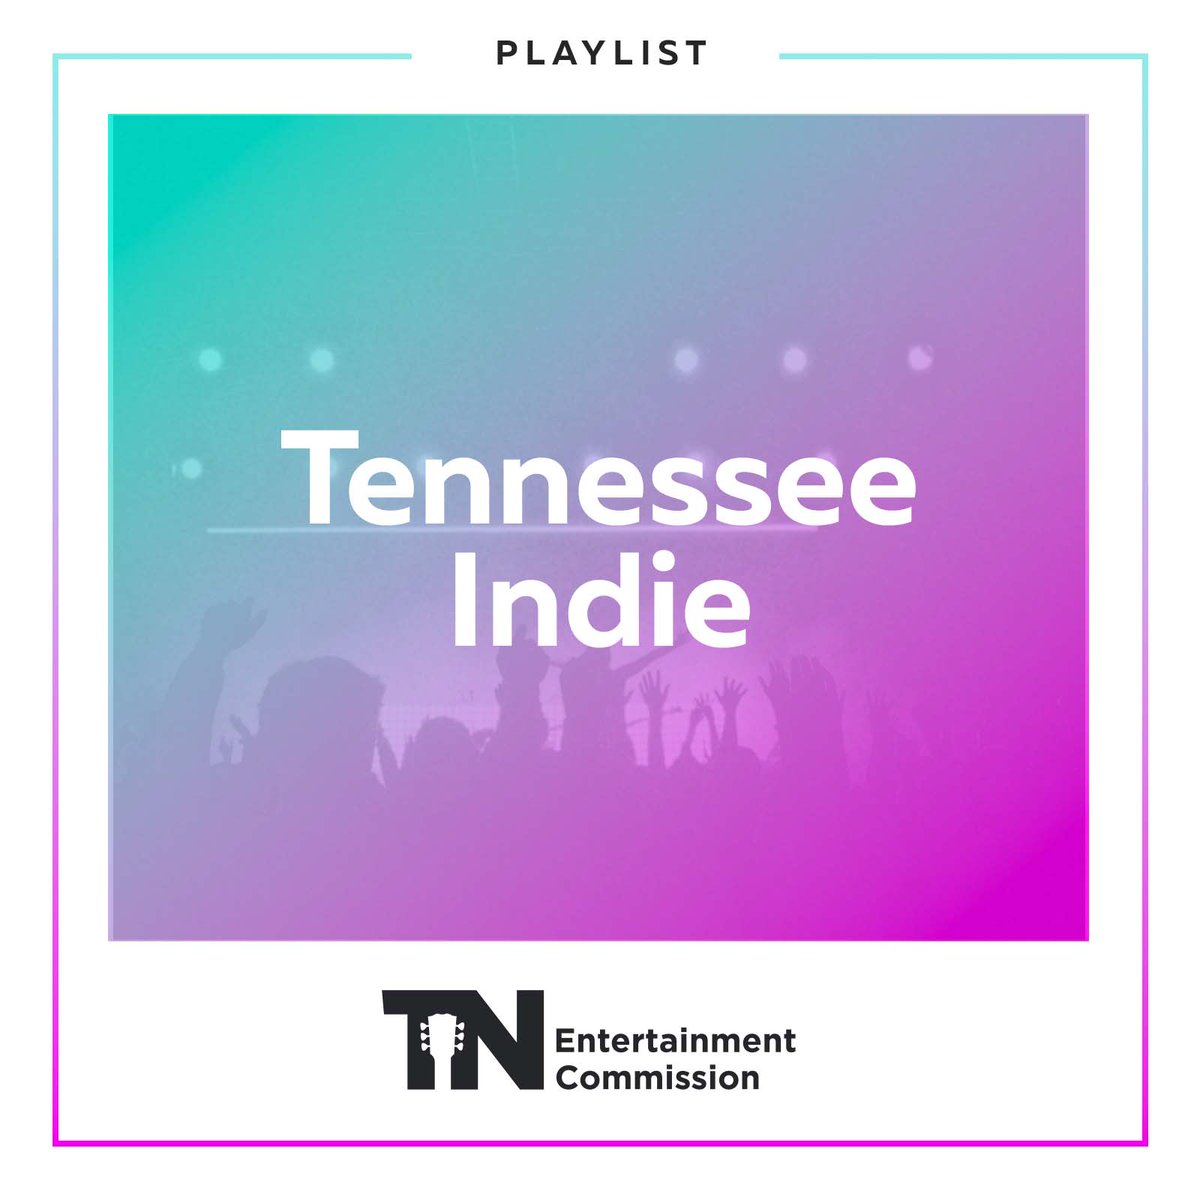 Support Tennessee's Independent Artists by streaming their music! We've made it easy by putting some of our favorite TN Indie artists in one playlist! 🎸🎤 Listen now and let us know what you'd like to hear in our next playlist: bit.ly/3xIzAfN